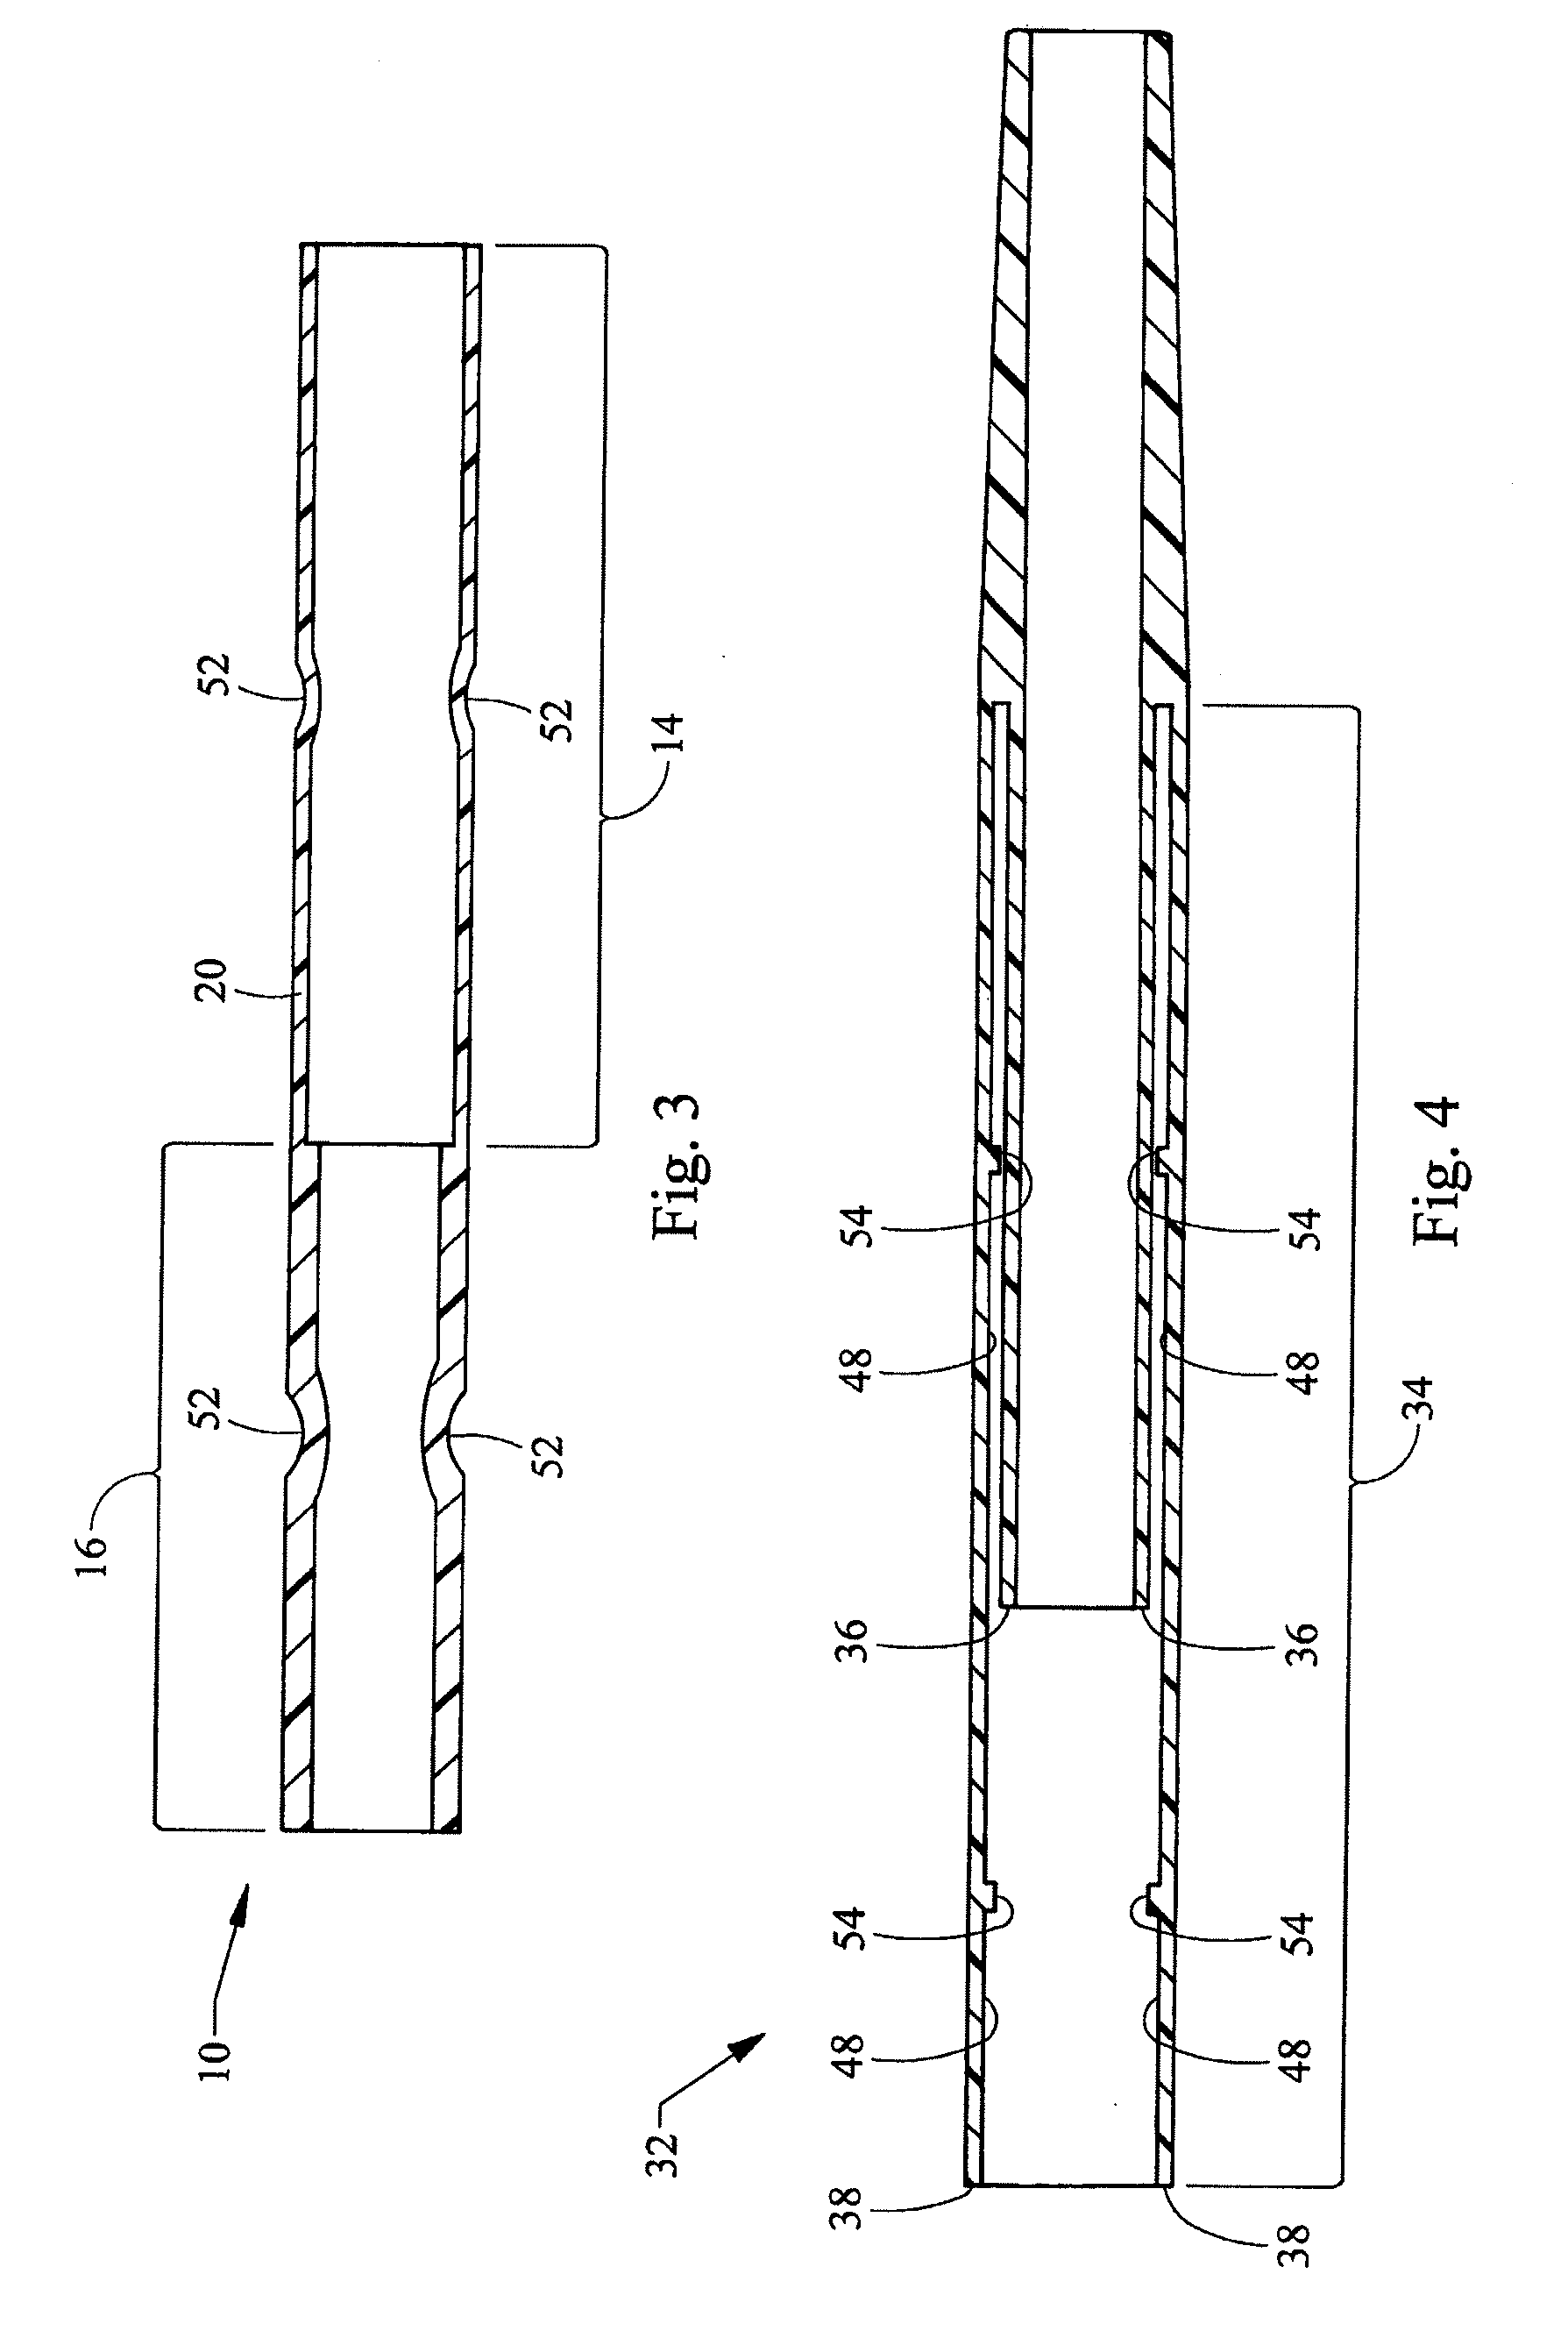 Endovascular Device Tip Assembly